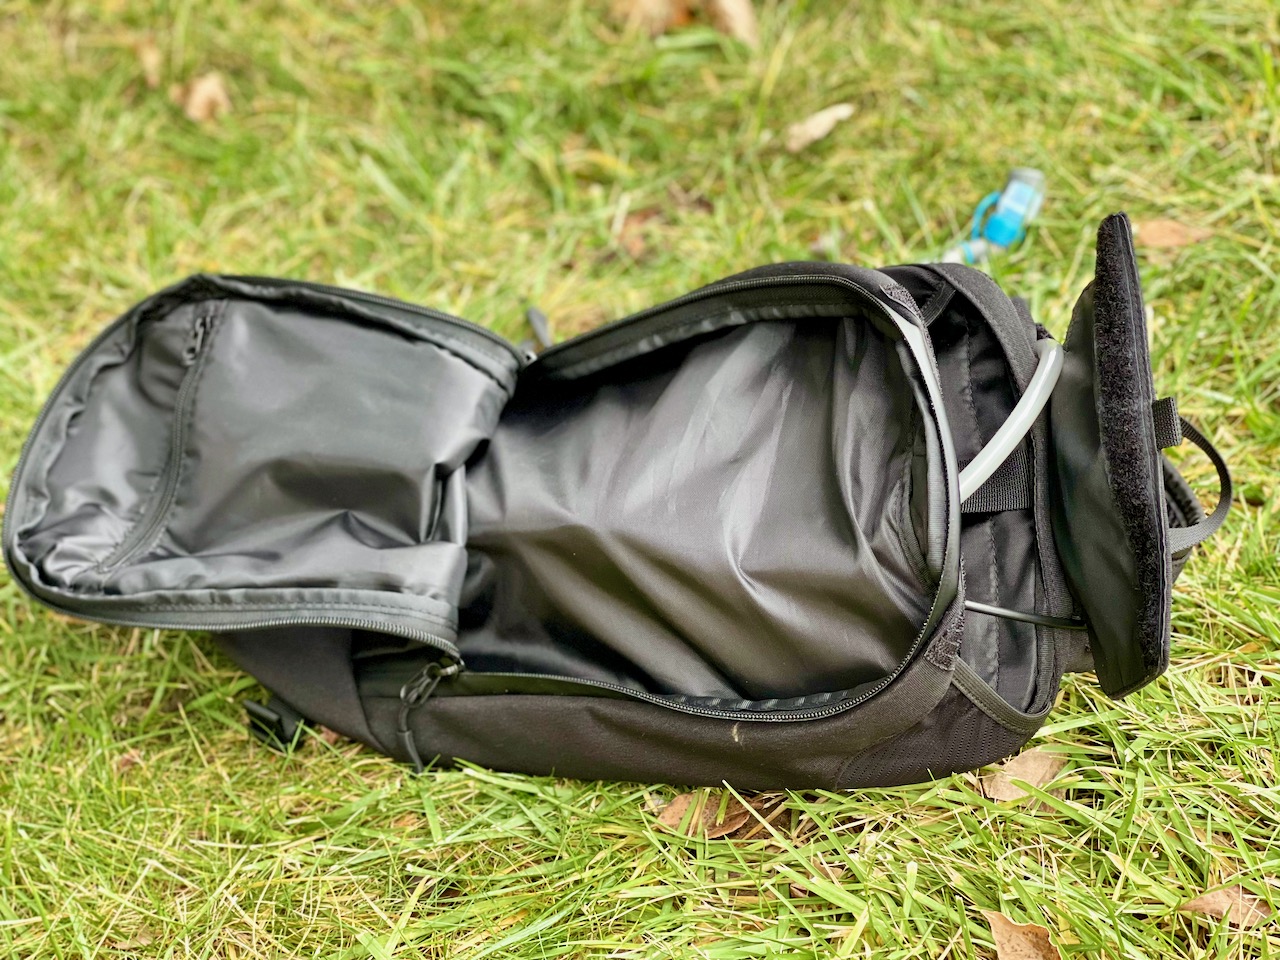 MXXY hydration pack insdie bag